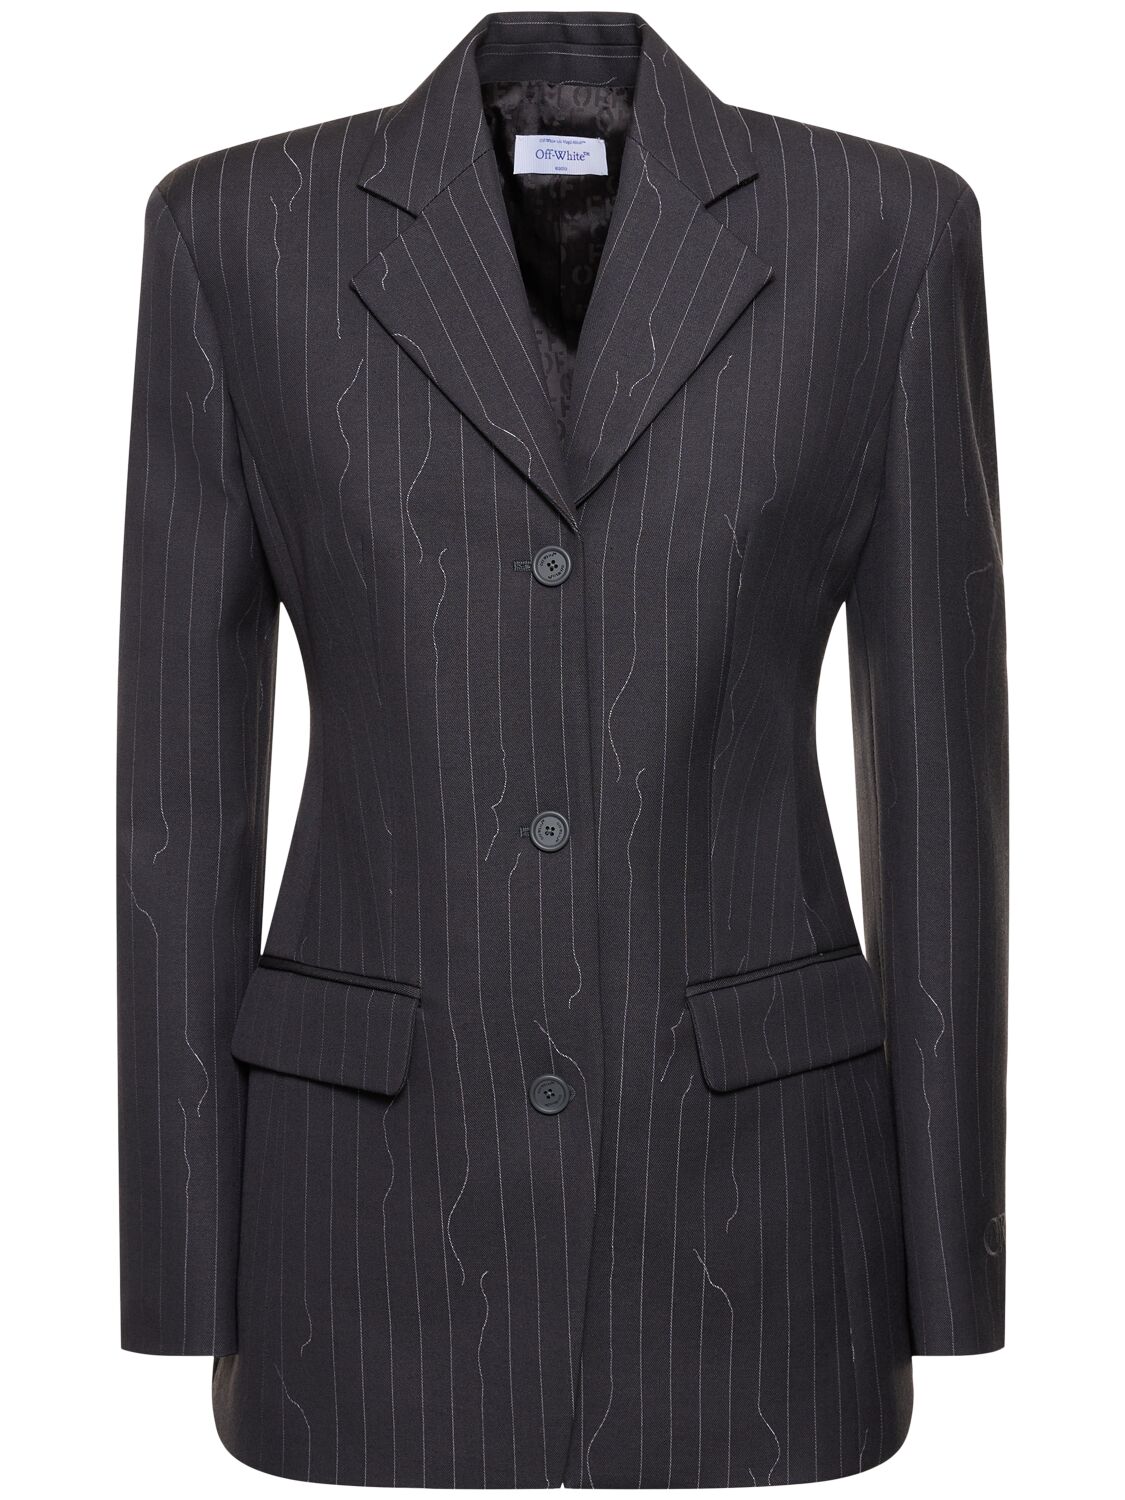 Image of Tailored Wool Blend Jacket